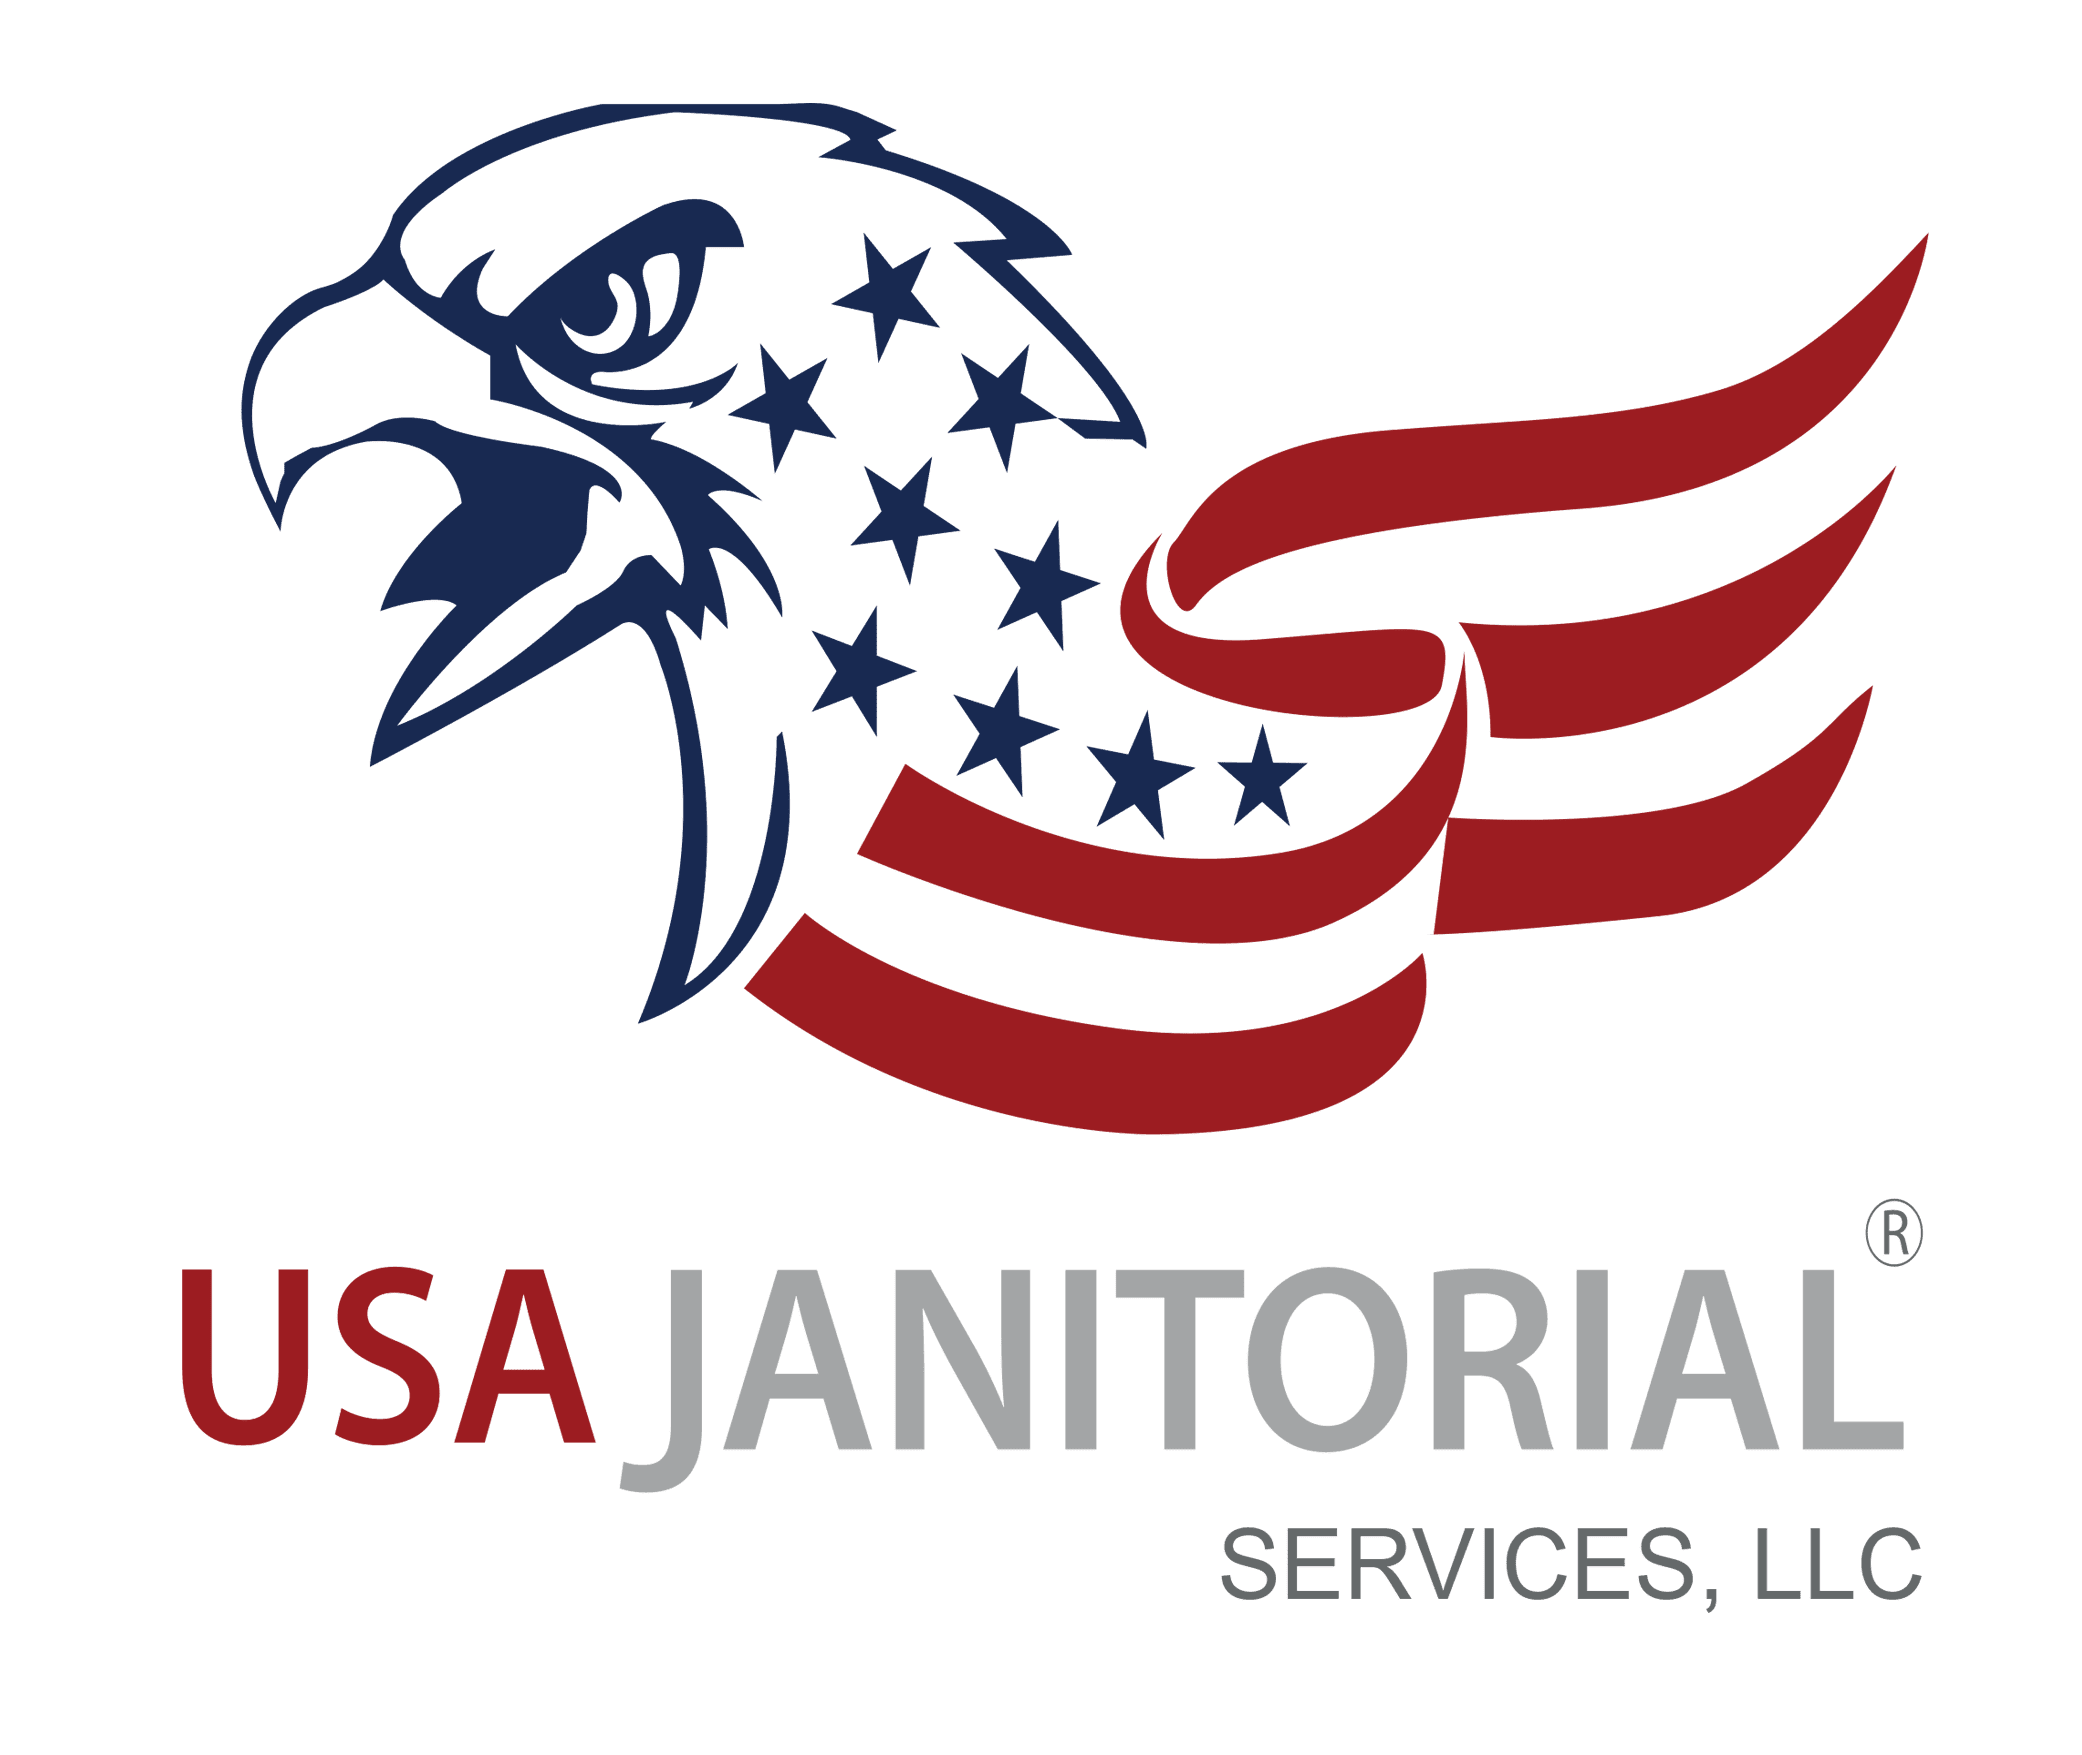 USA Janitorial Services, LLC